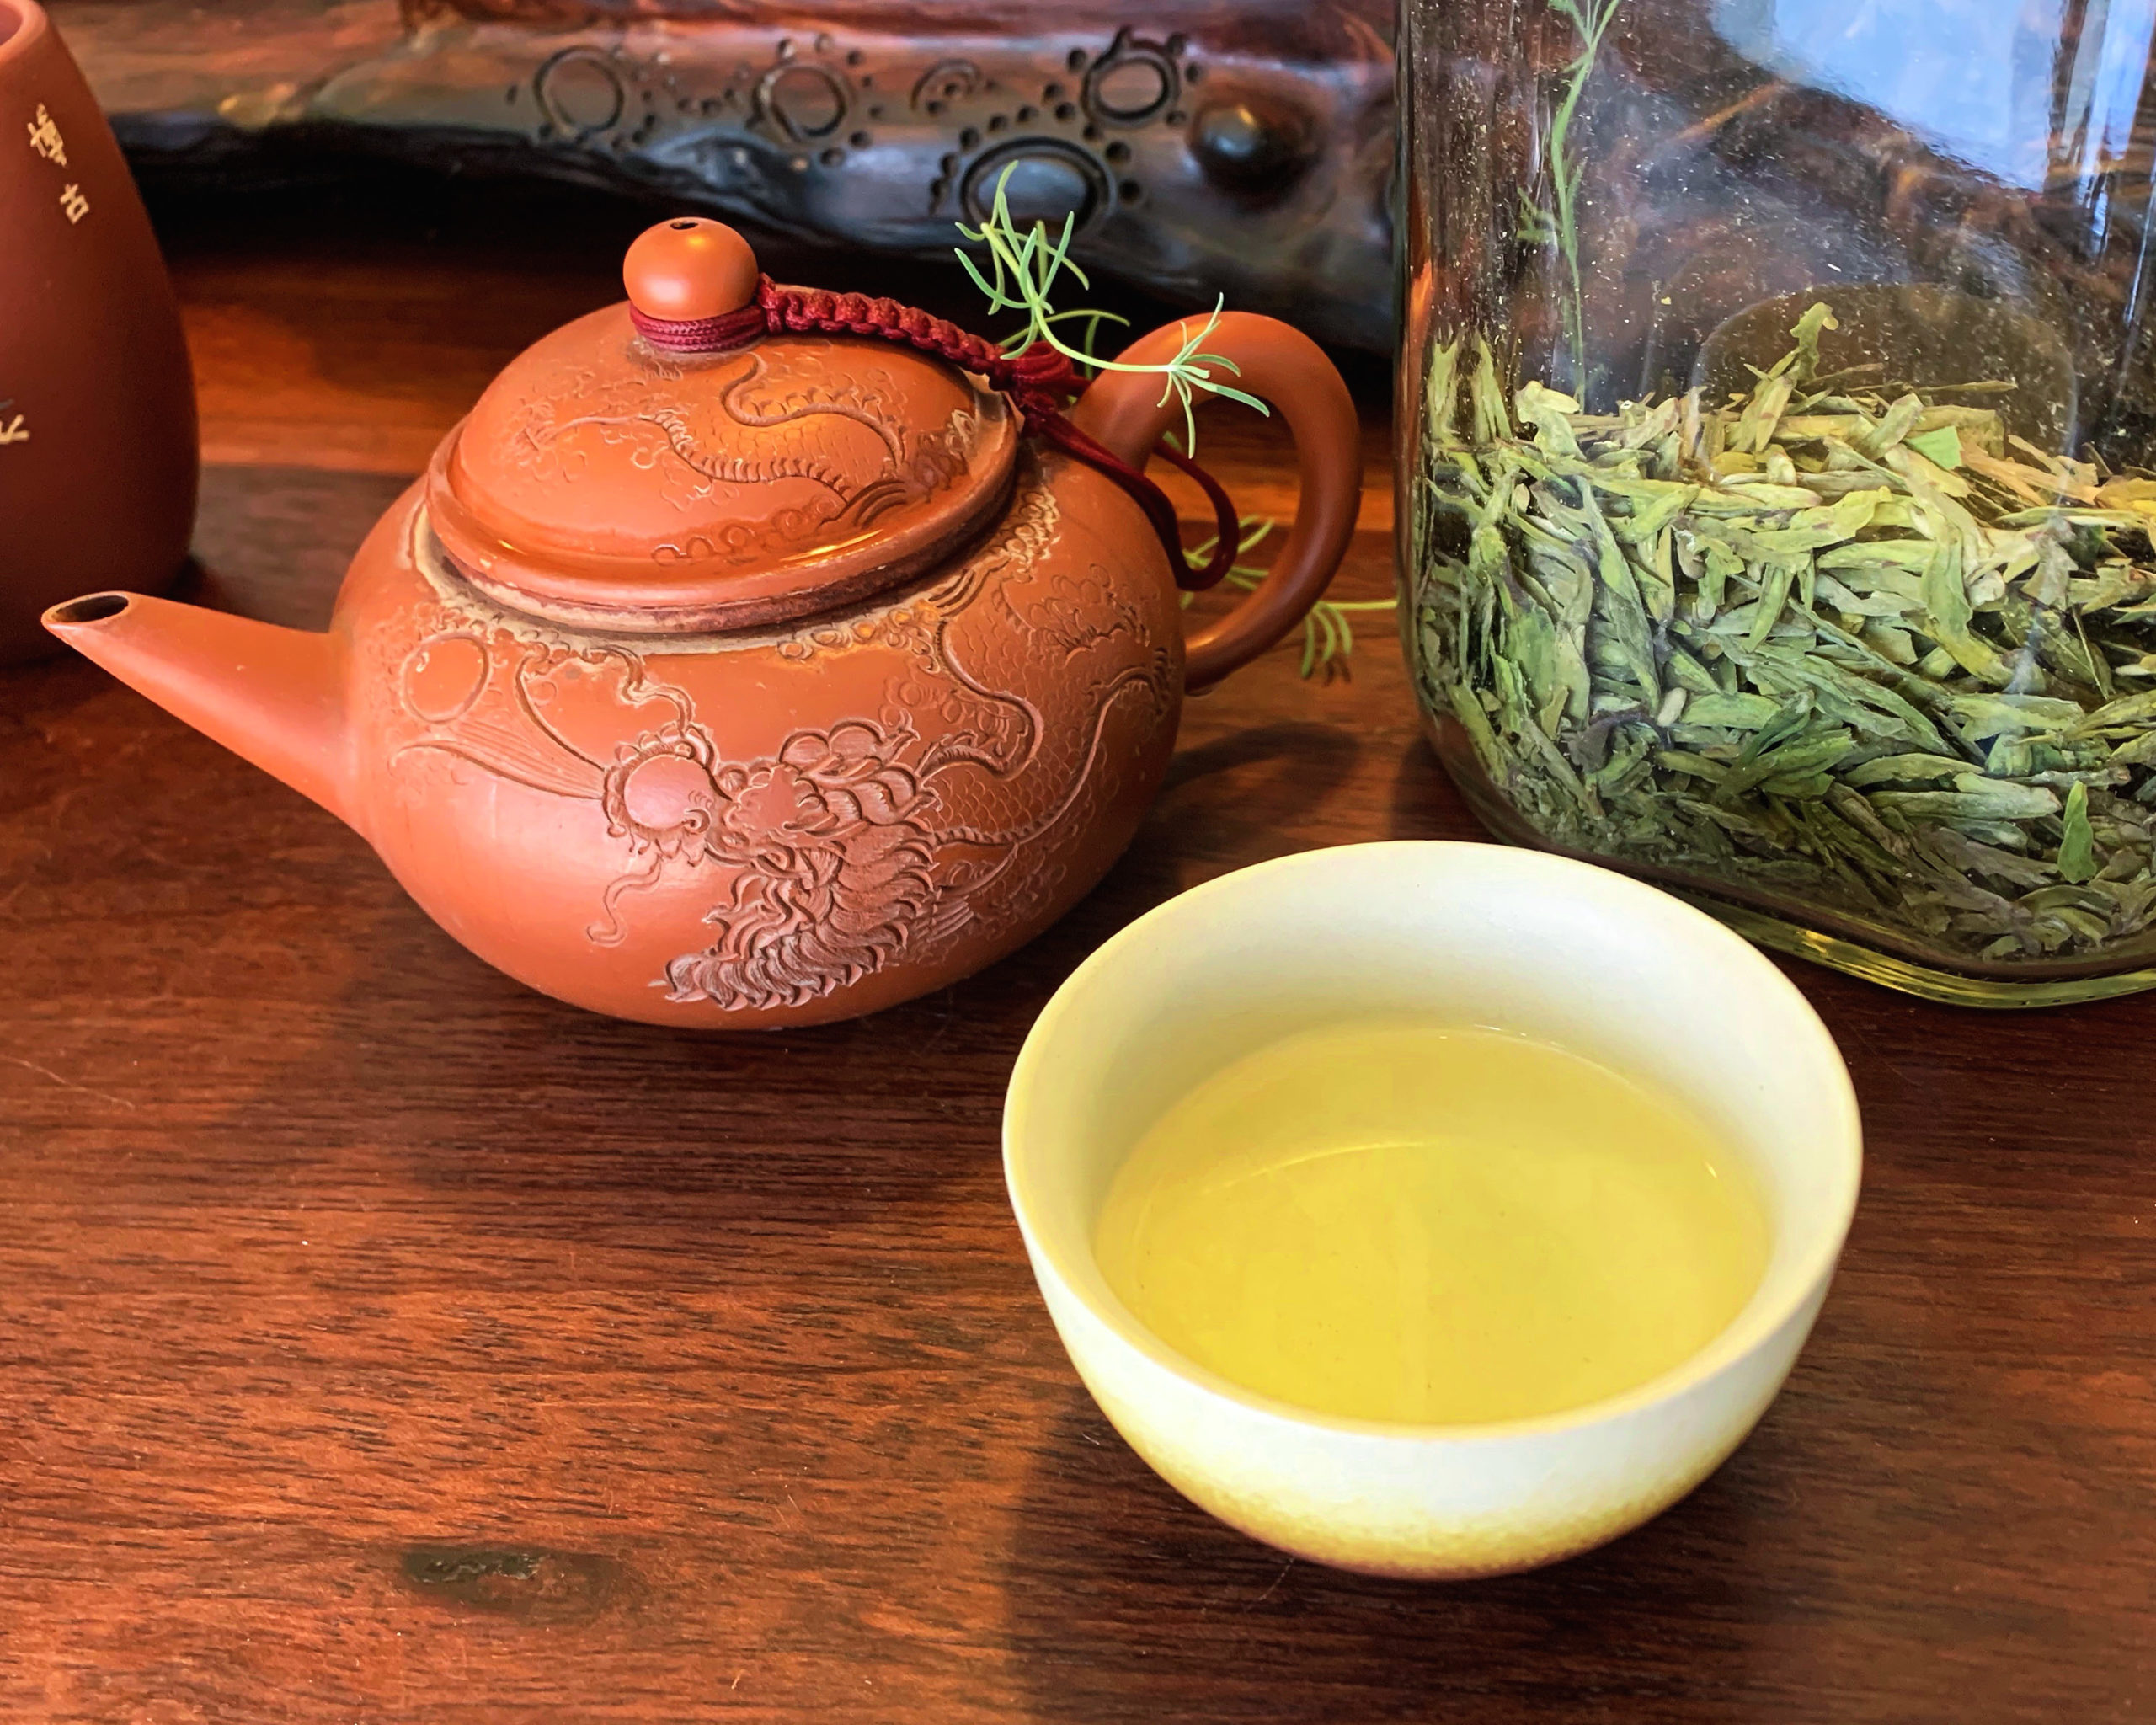 A red clay tea pot with a carved dragon pattern sitting on a wooden table next to a glass jar of dry Longjing tea and a small cup of brewed green tea.